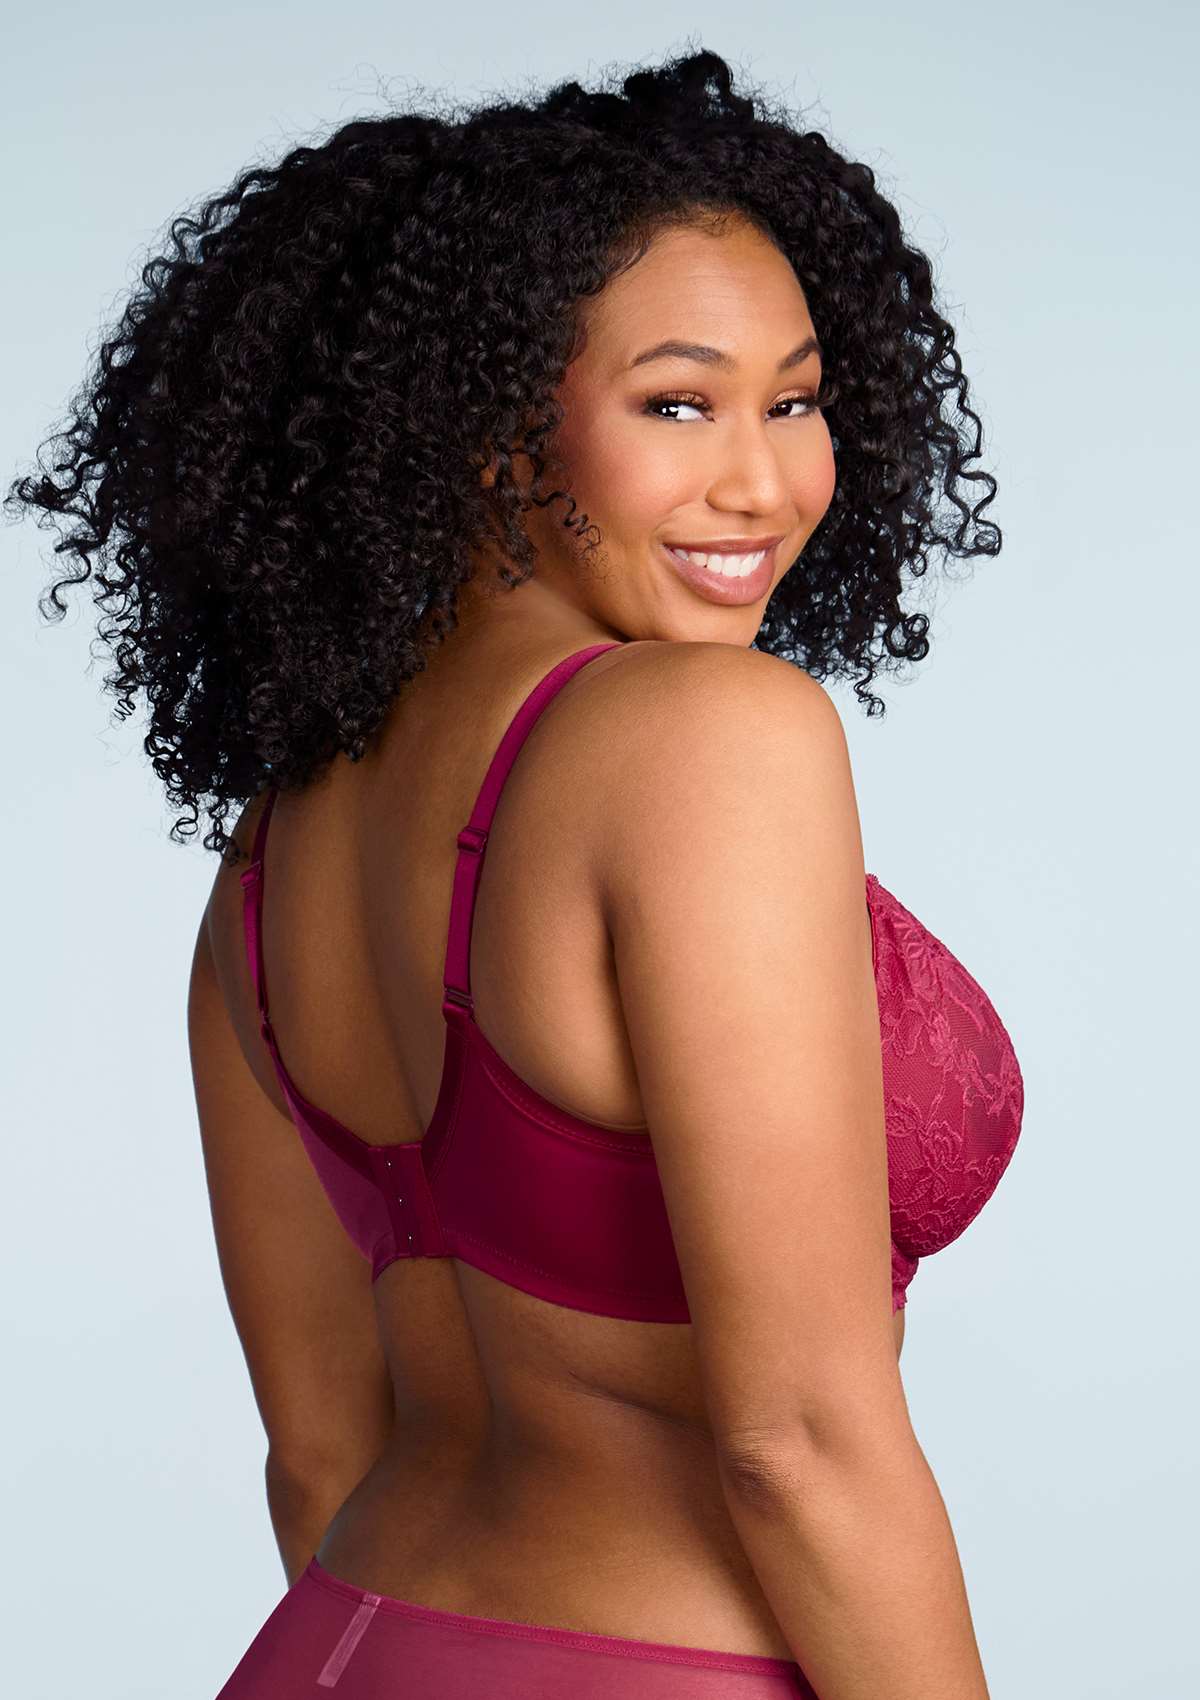 HSIA Pretty In Petals Sexy Lace Bra: Full Coverage Back Smoothing Bra - Copper Red / 44 / D